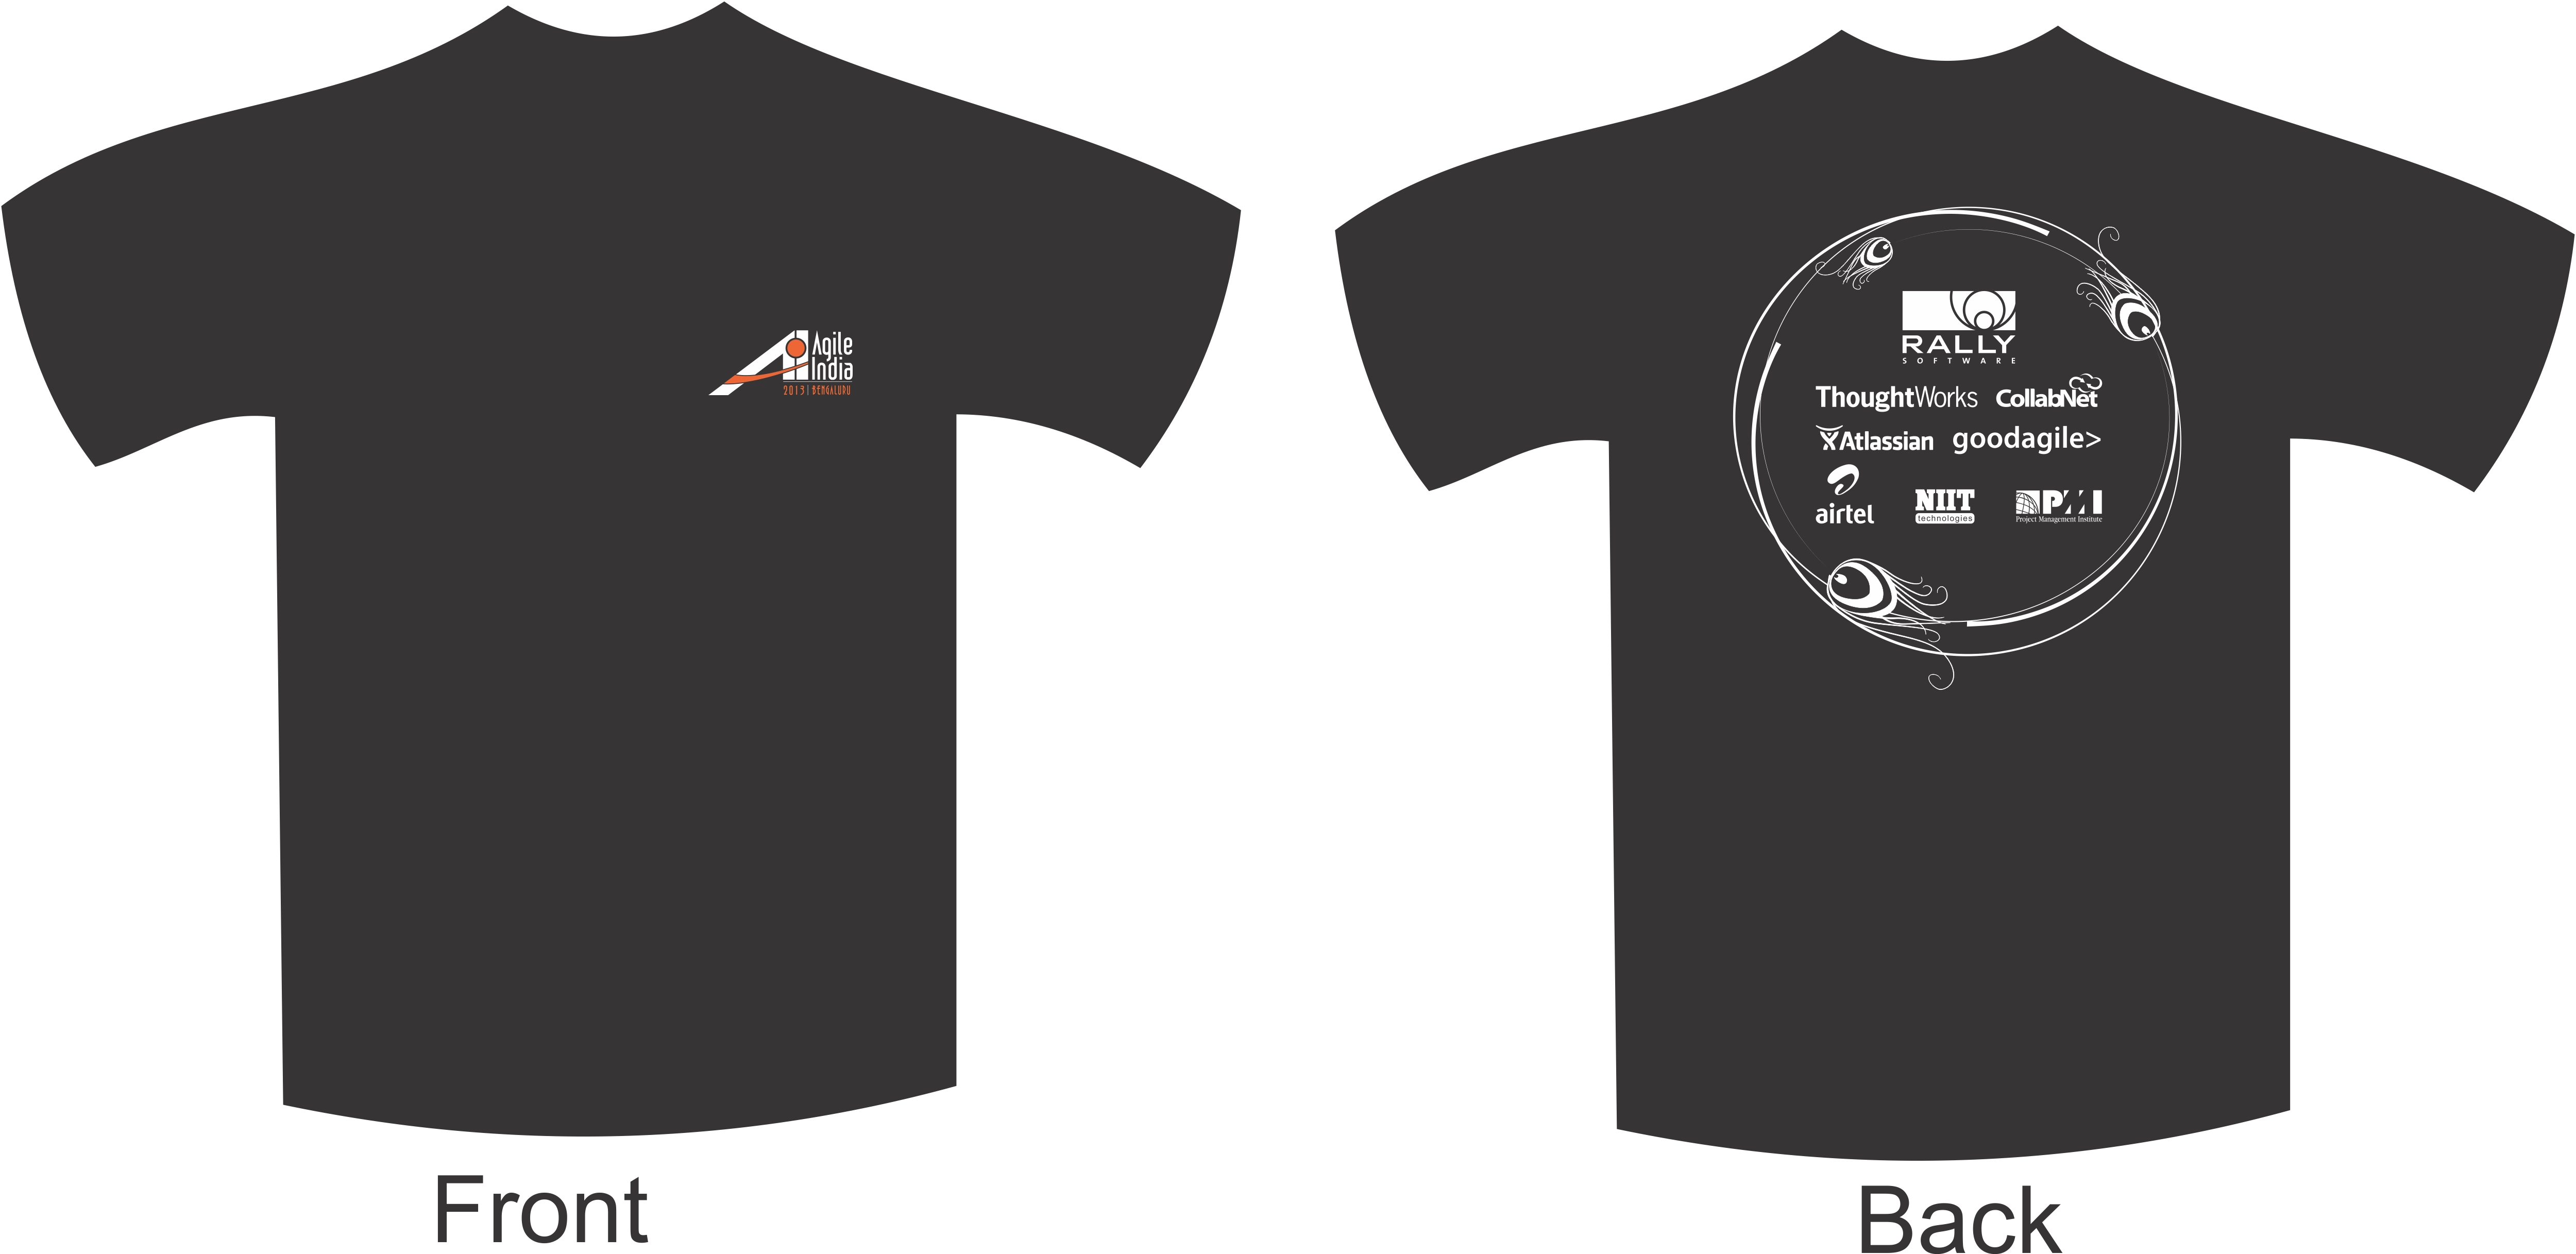 agile-india-2013-conference-t-shirt-design-managed-chaos-by-naresh-jain